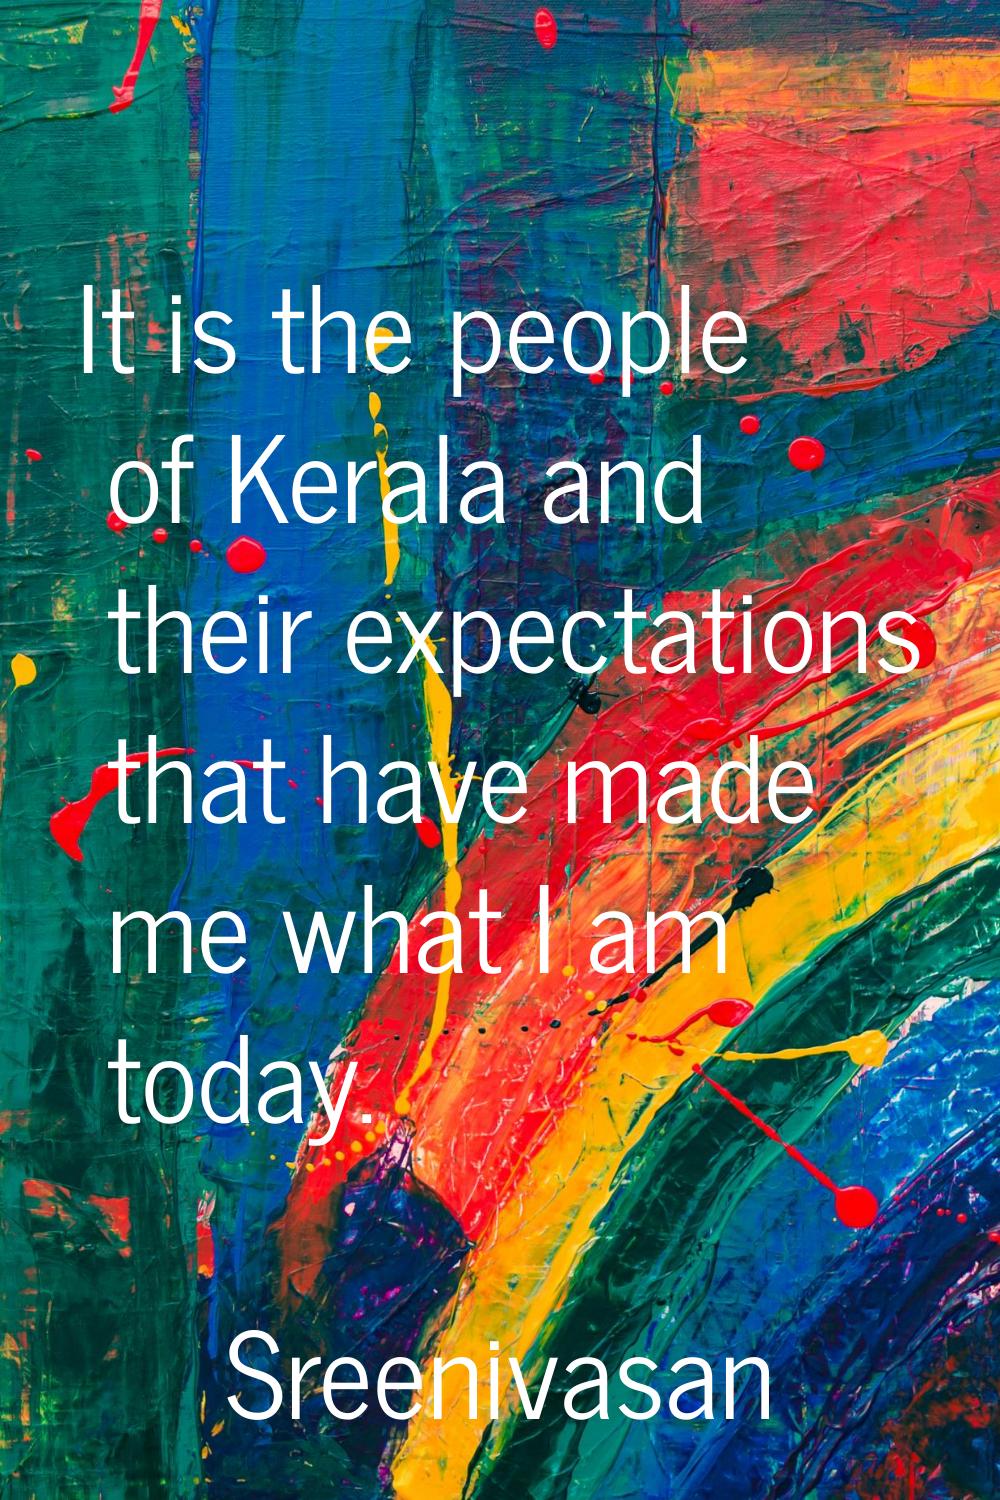 It is the people of Kerala and their expectations that have made me what I am today.